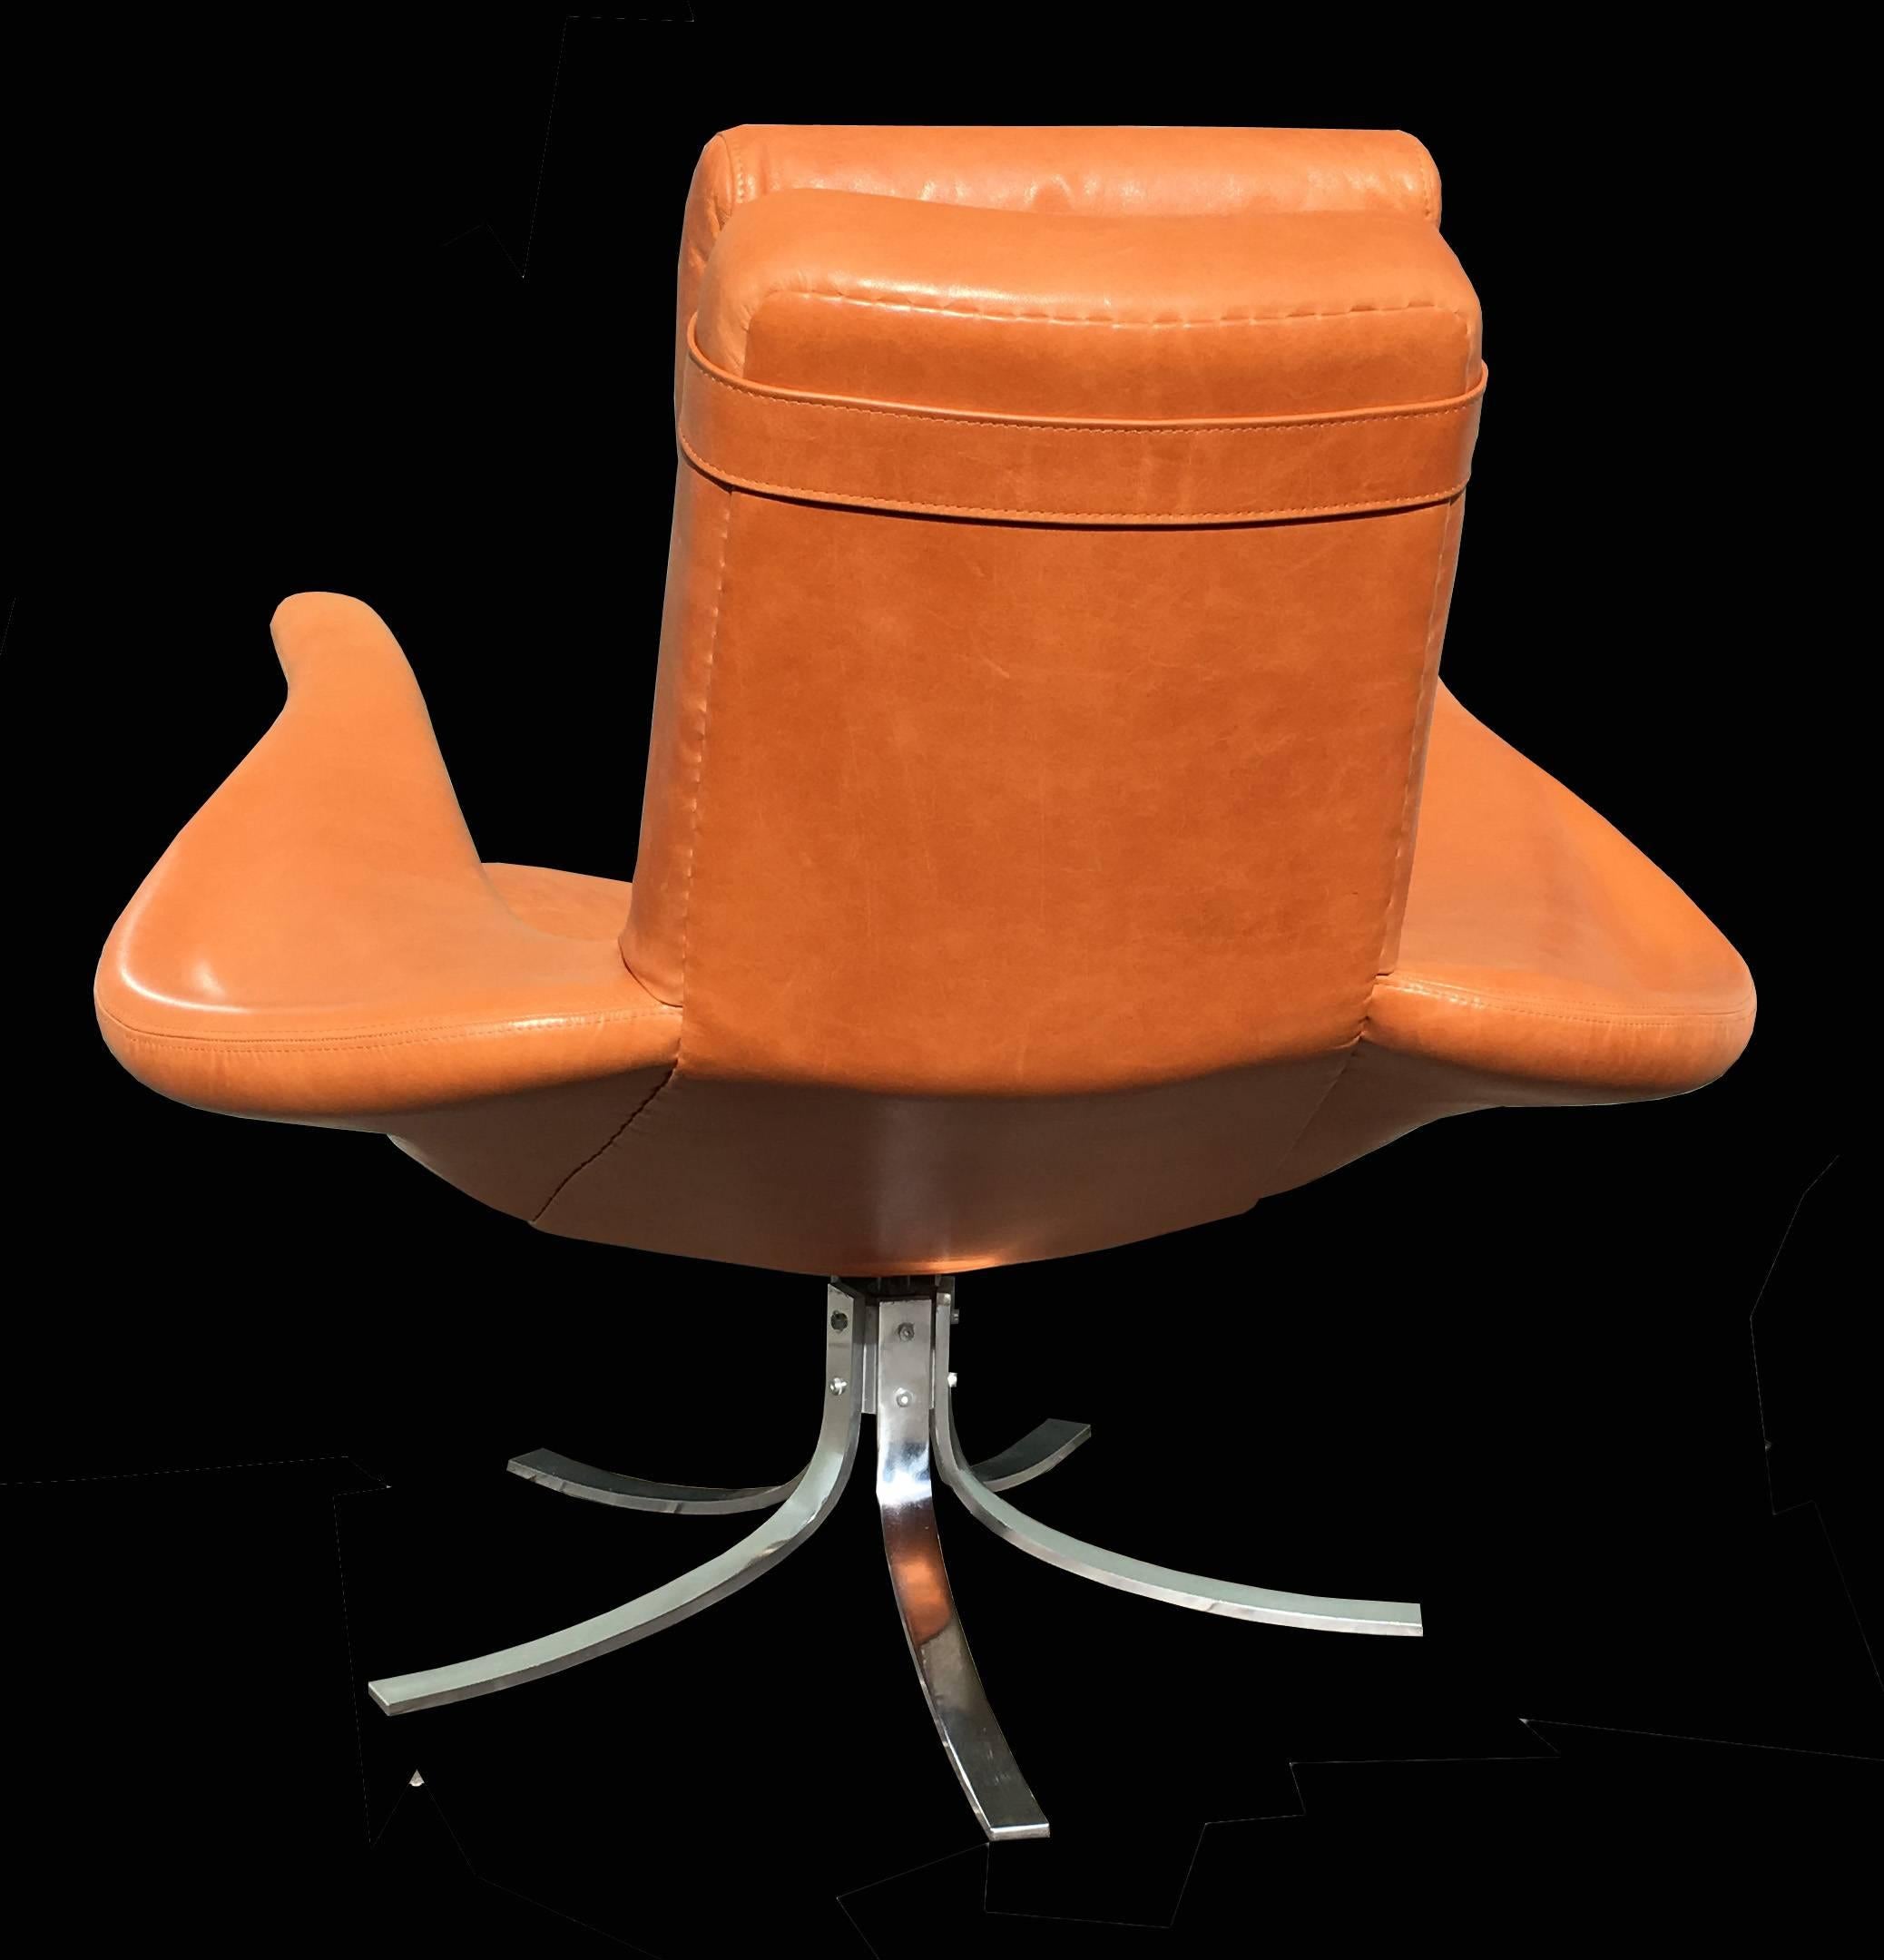 A stunning example of this most beautifull and sculptural swivel lounge chair and Ottoman in the most sought after Cognac leather in extremely good condition
Designed by Gosta Berg and Stenerik Eriksson for Fritz Hansen in 1968 and made in small